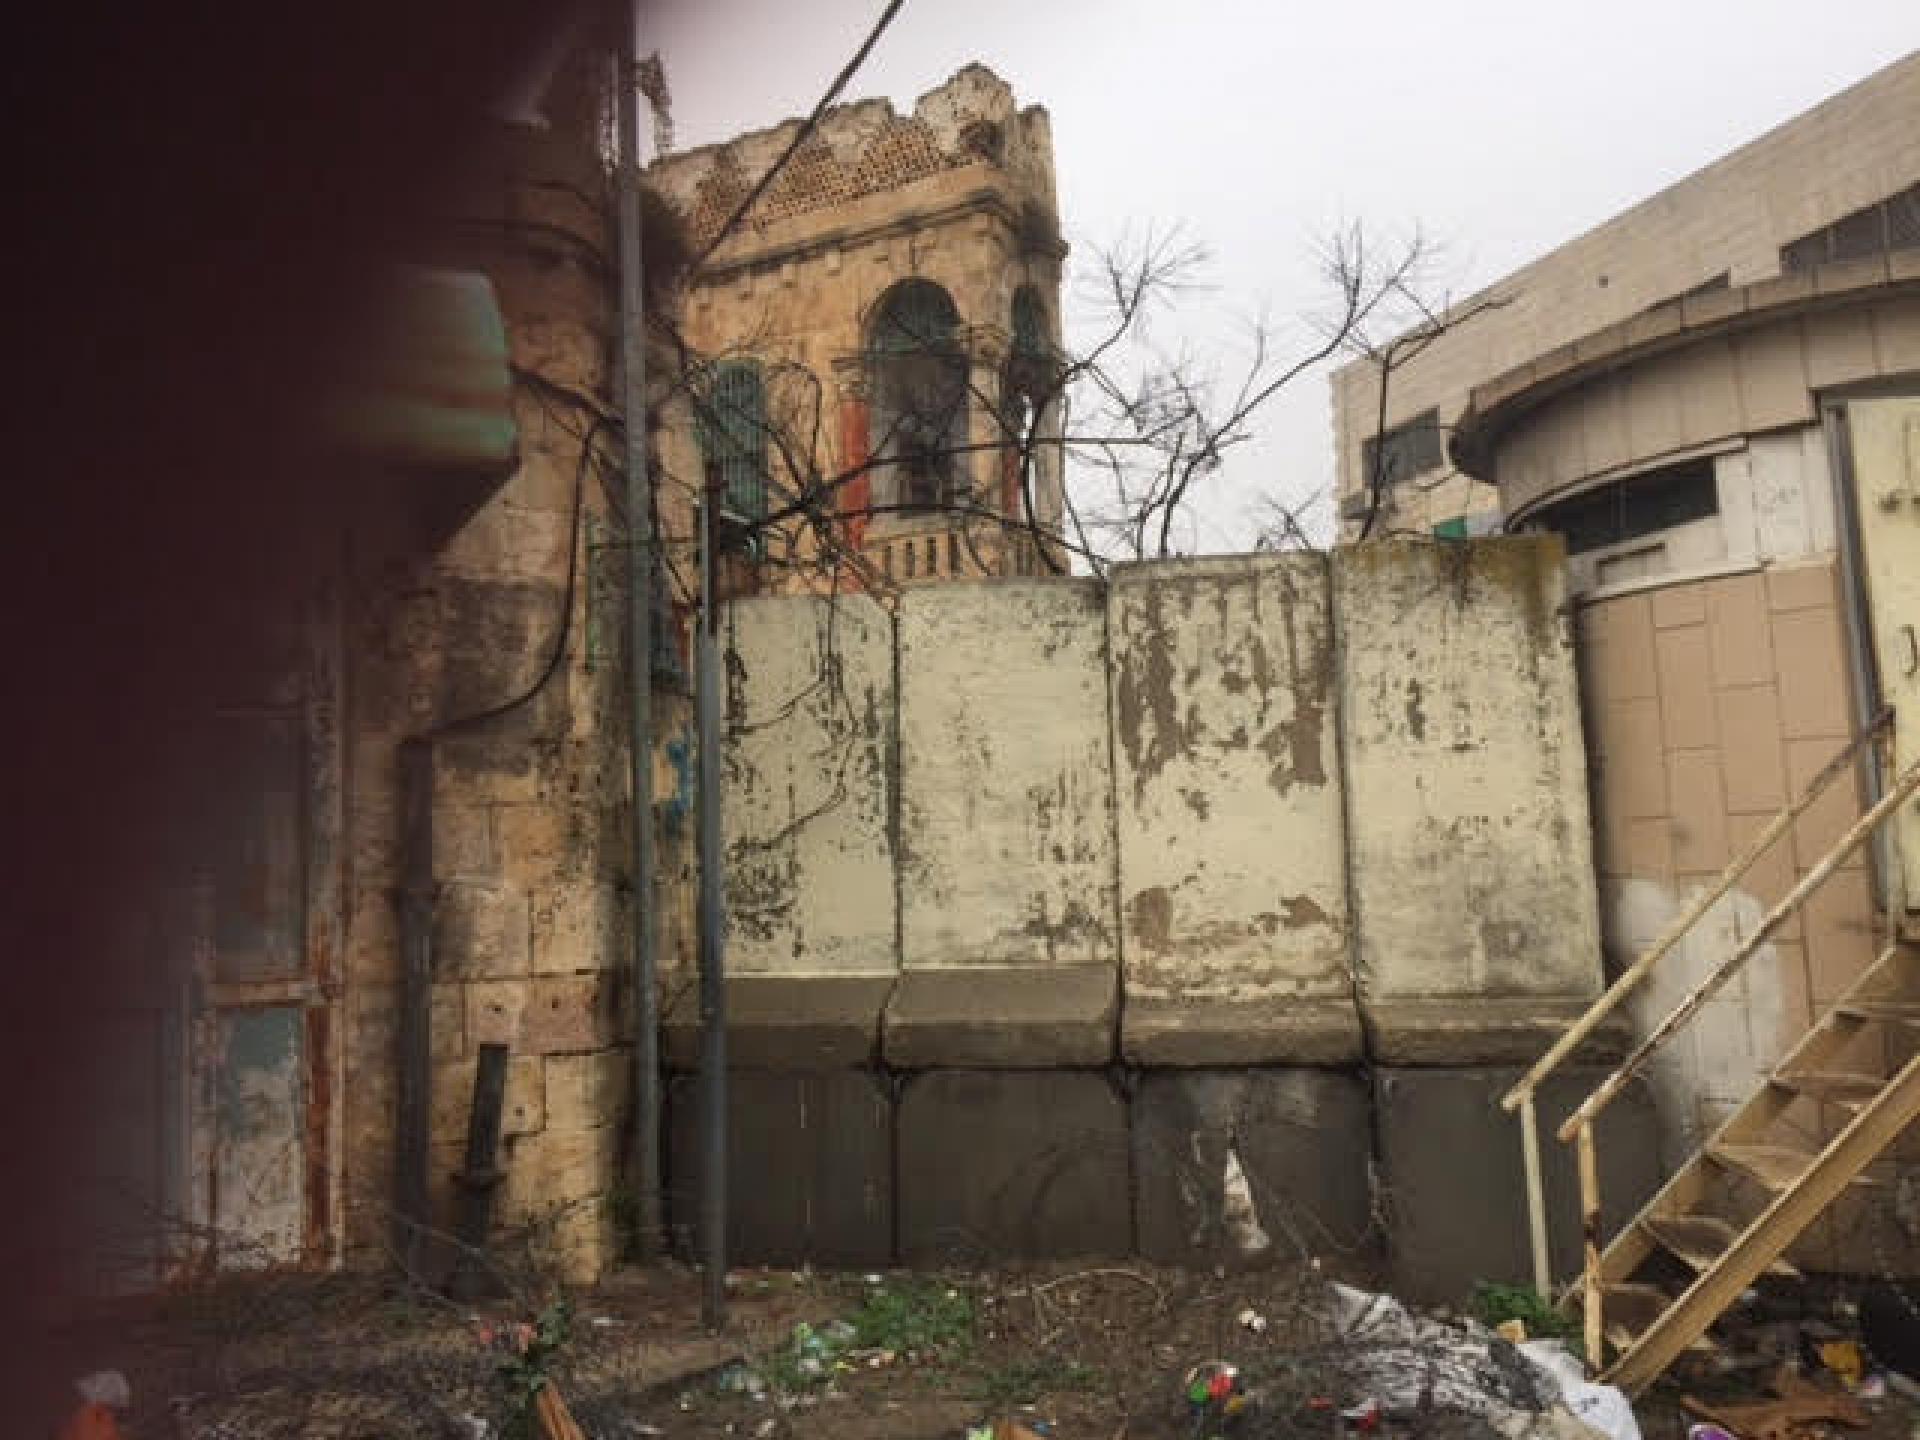 The wall that separates the yeshiva from the Casbah can be seen, and you can see how the yeshiva students or the soldiers enter Area H1 whenever they feel like it